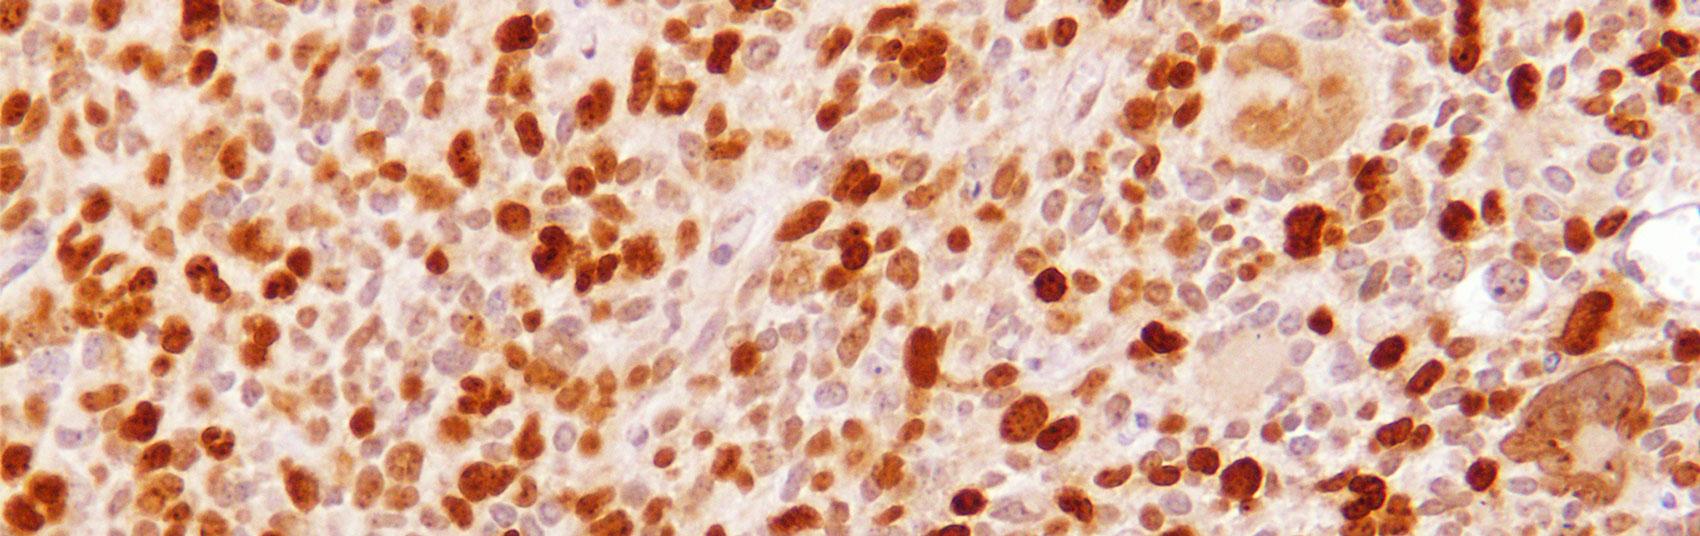 Microscopy image of glioma cells from the researchers’ preclinical mouse model